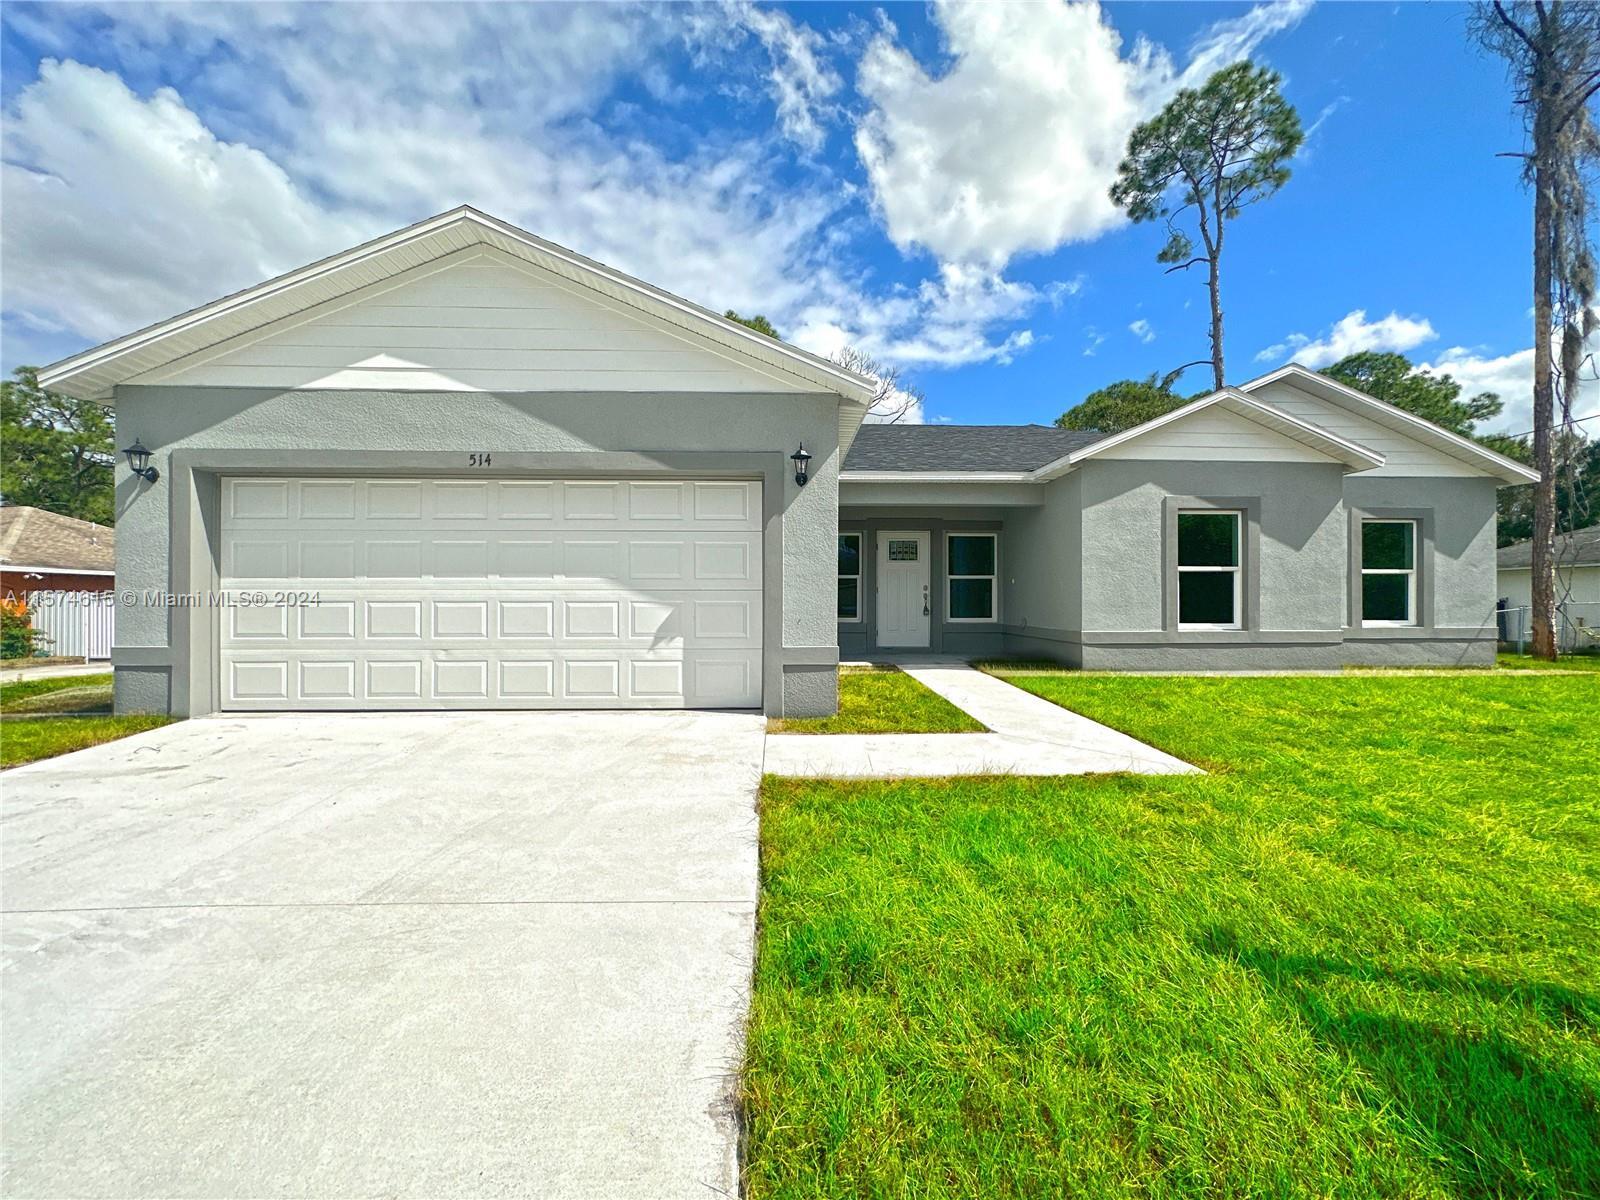 Photo of 185 Karlow Ave in Lehigh Acres, FL